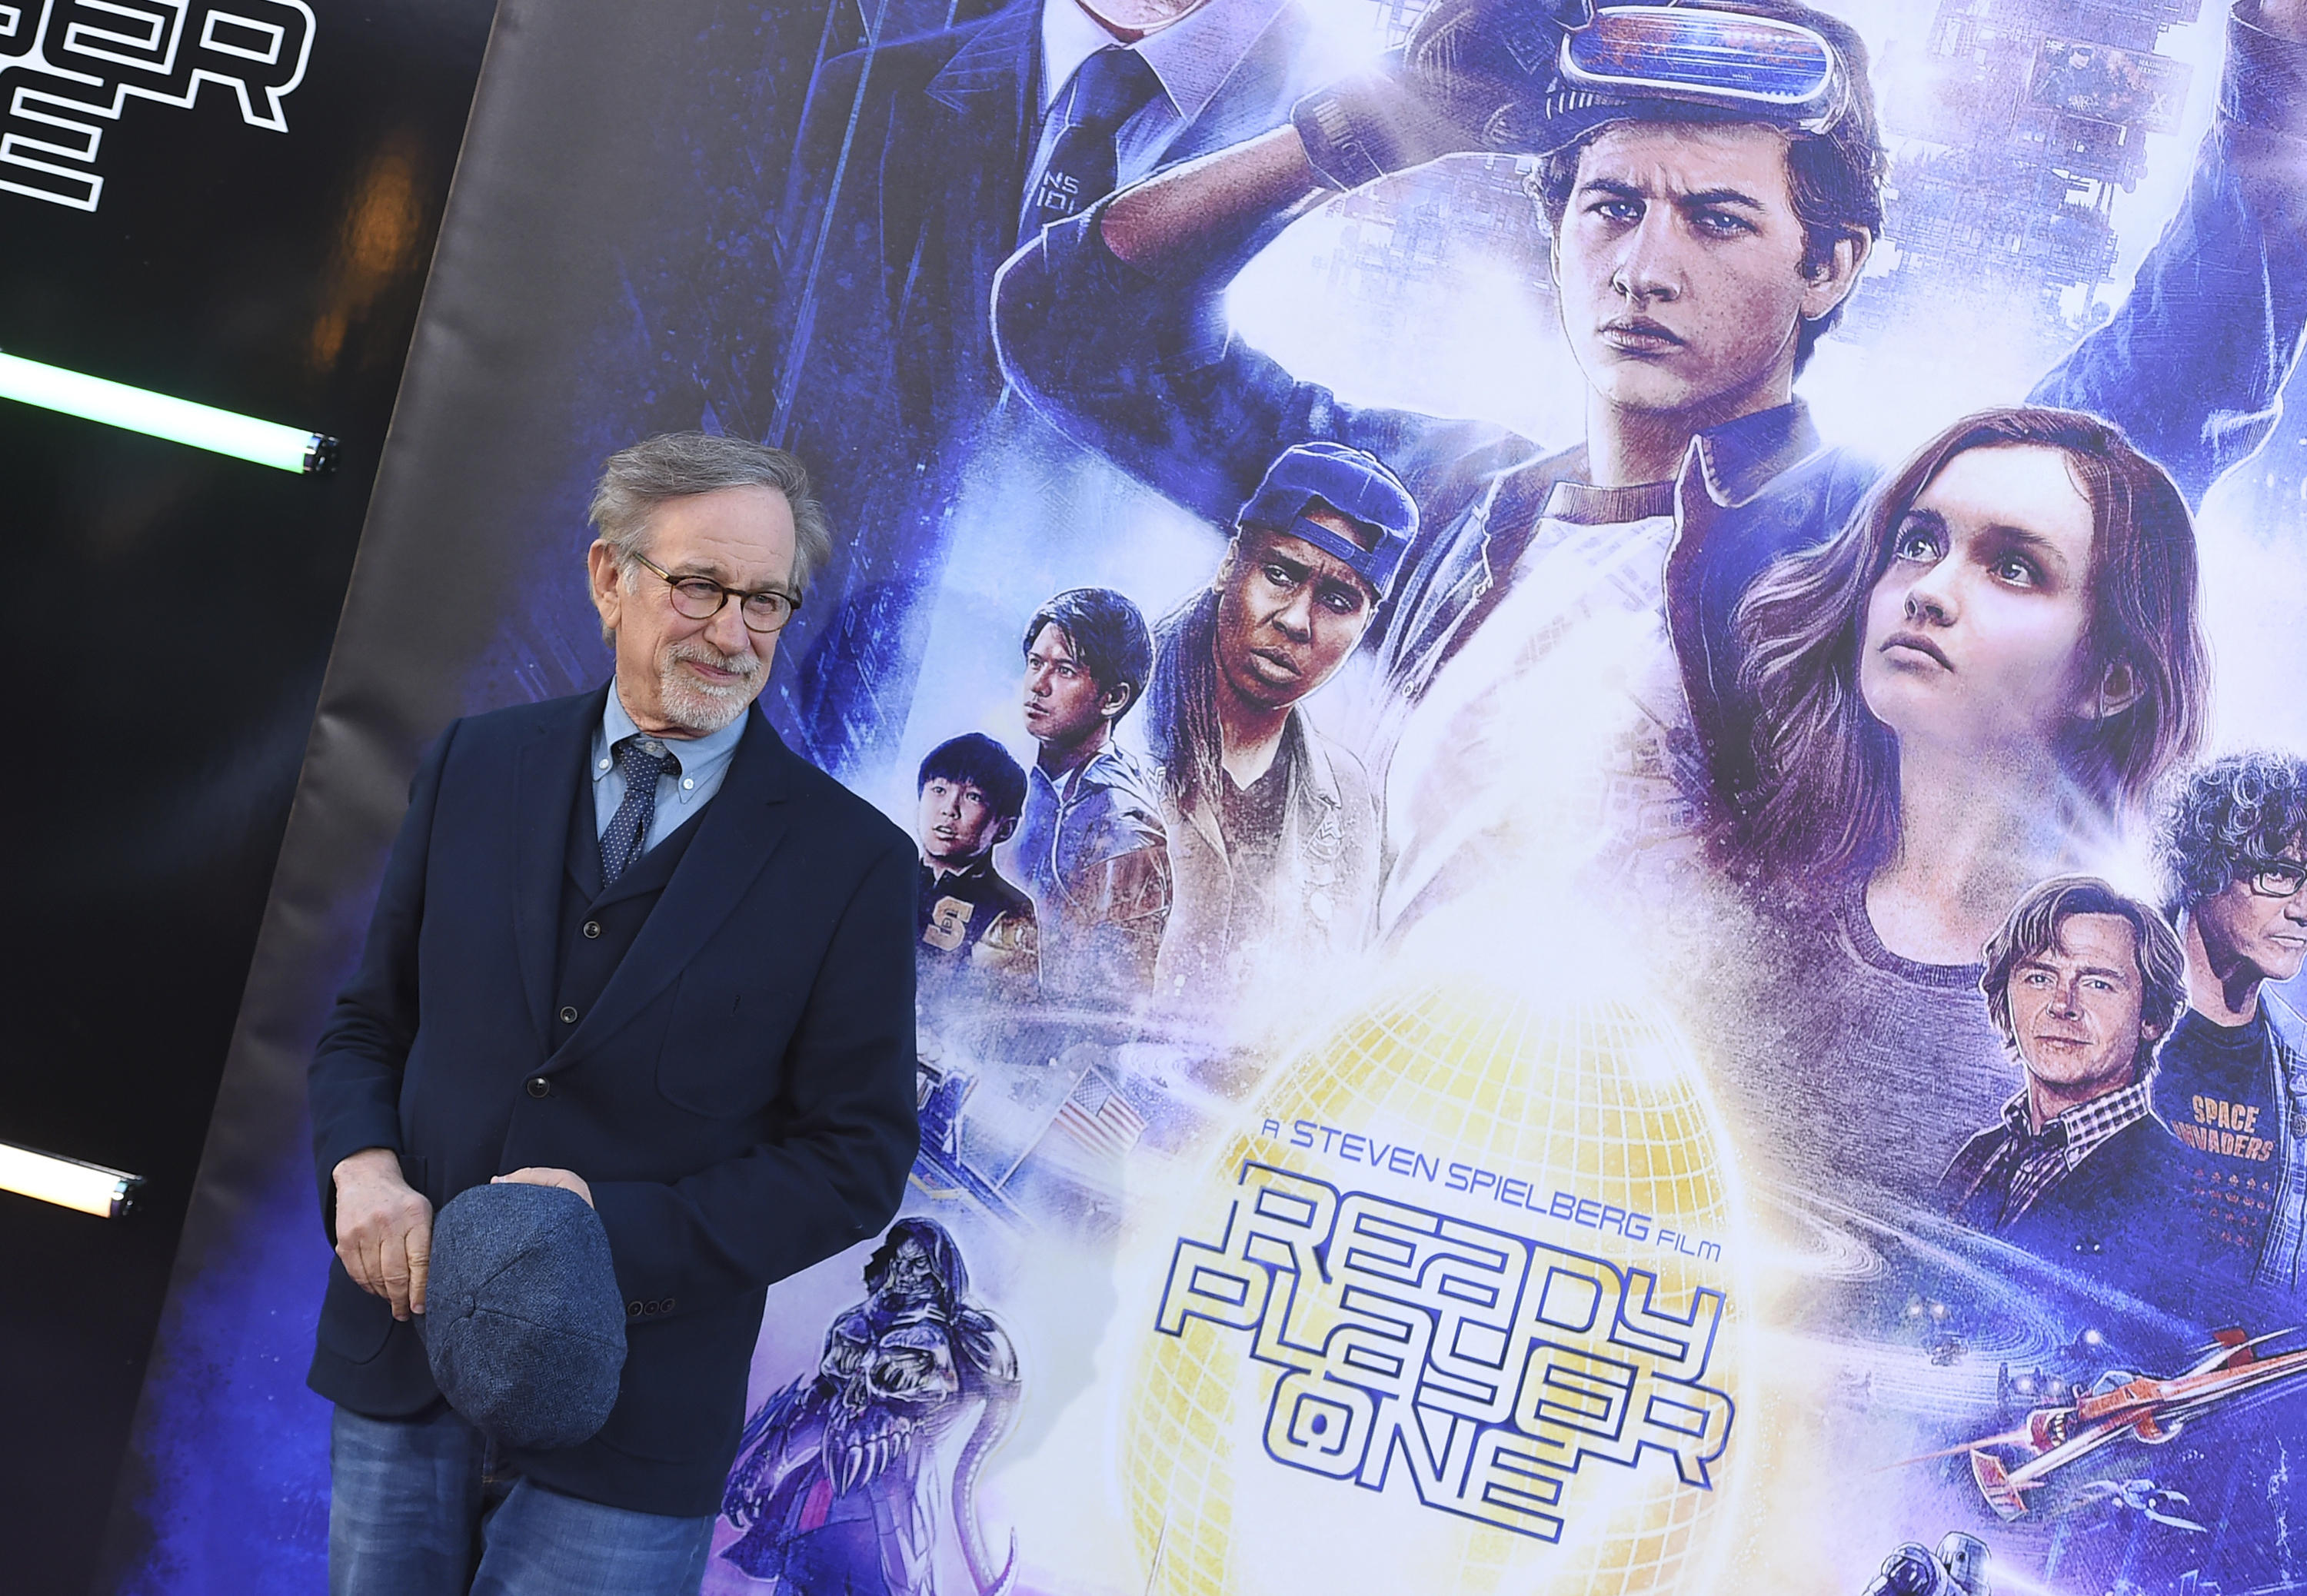 Steven Spielberg's Ready Player One tops holiday box office - CBS News